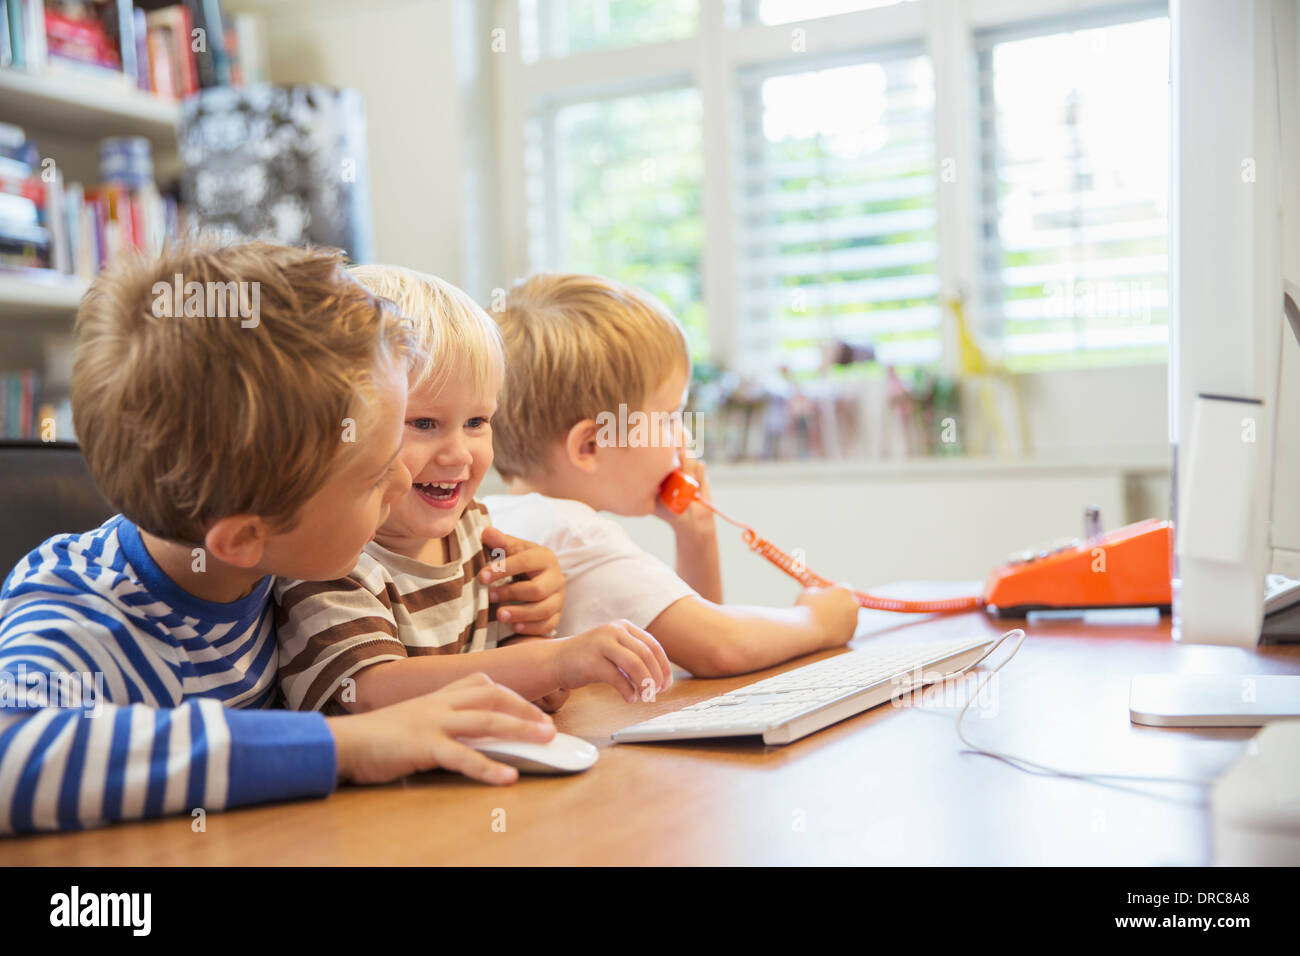 Children using home office together Stock Photo